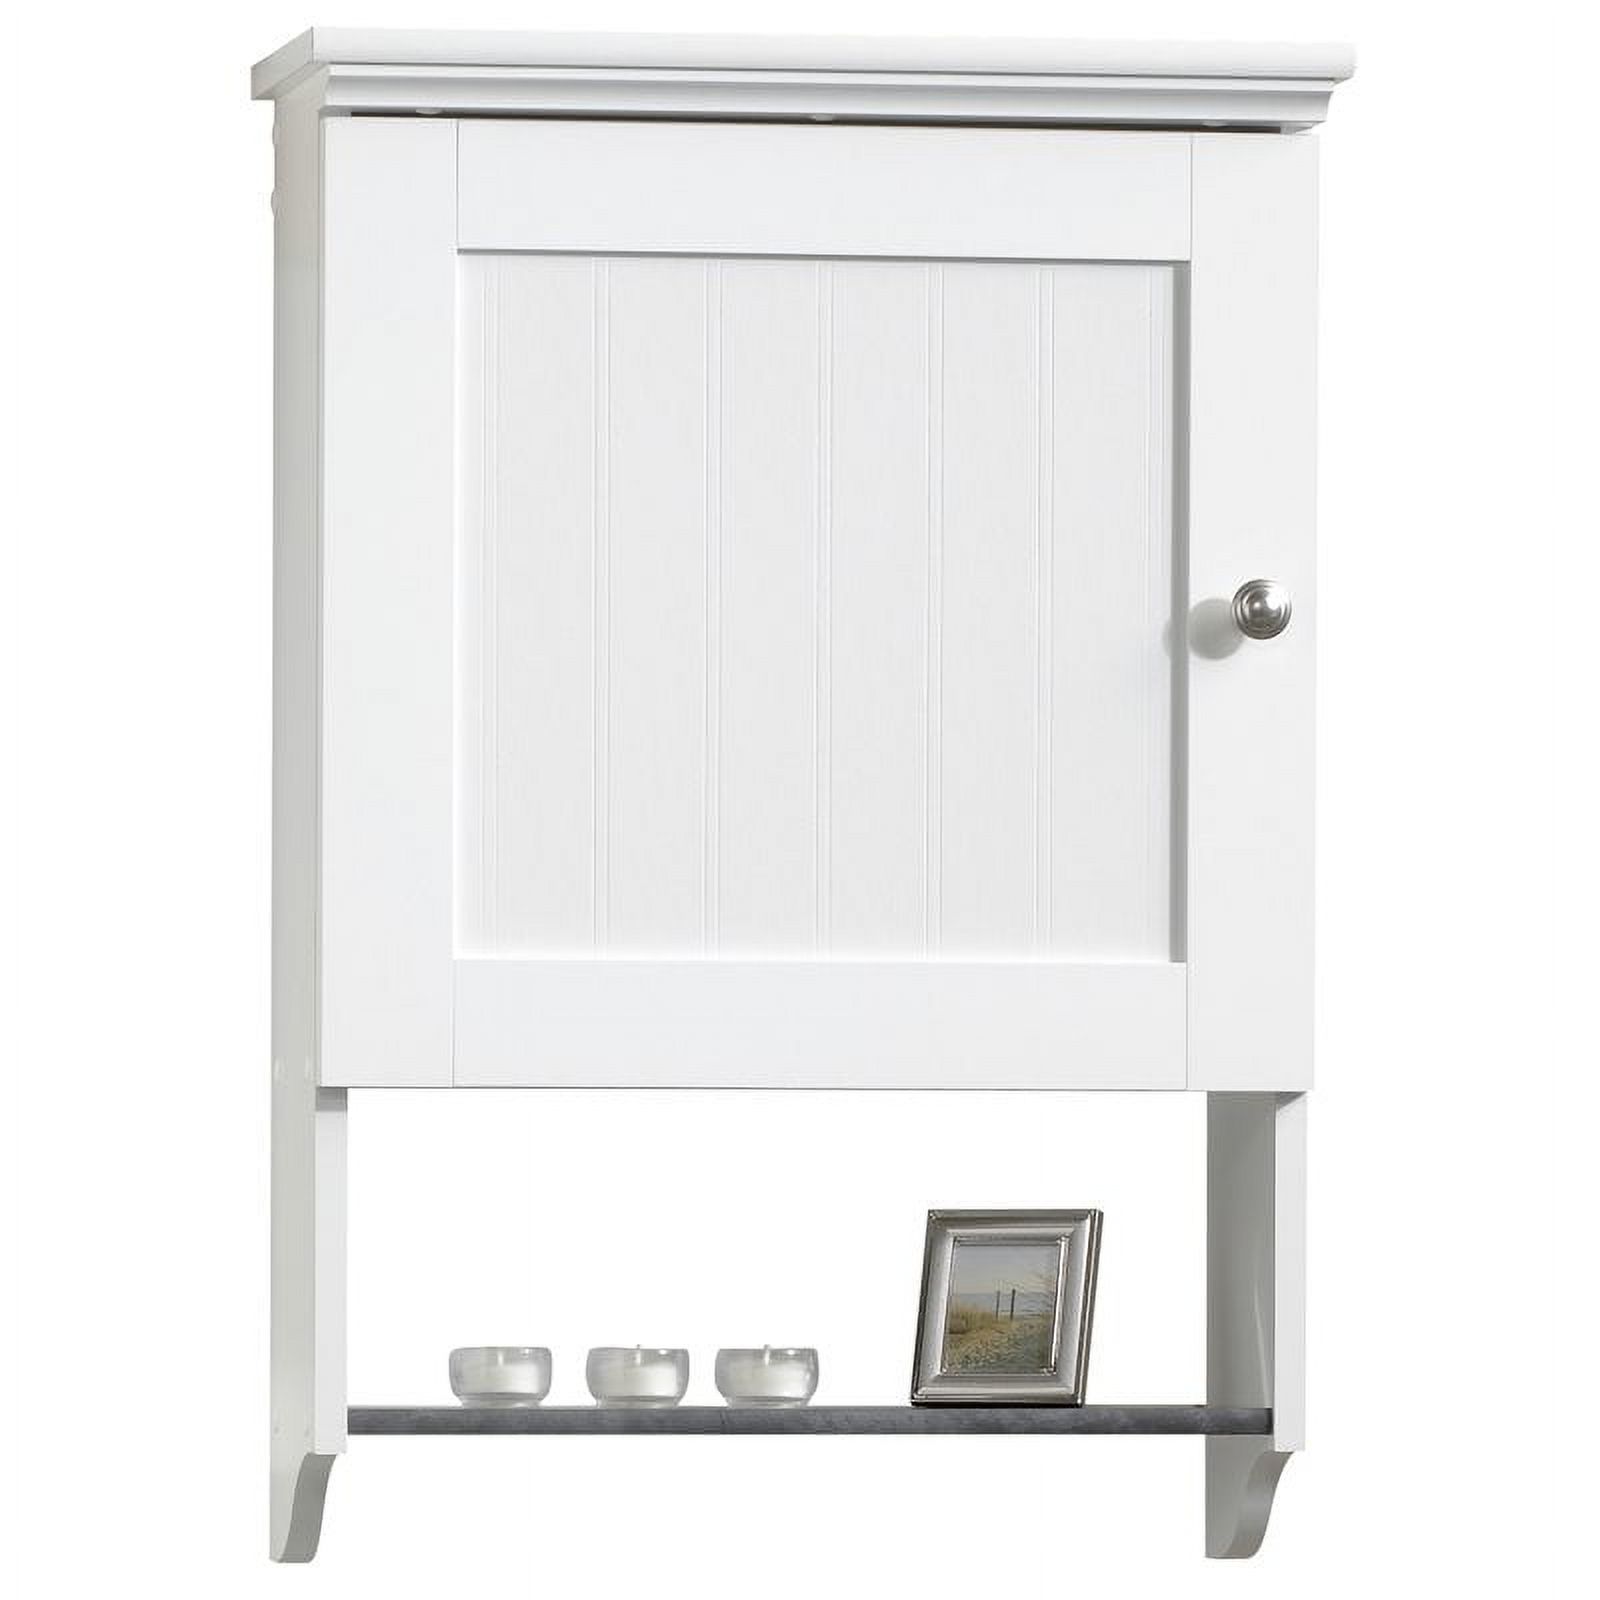 Sauder 414061 Caraway Wall Cabinet, Soft White® Finish - image 1 of 4